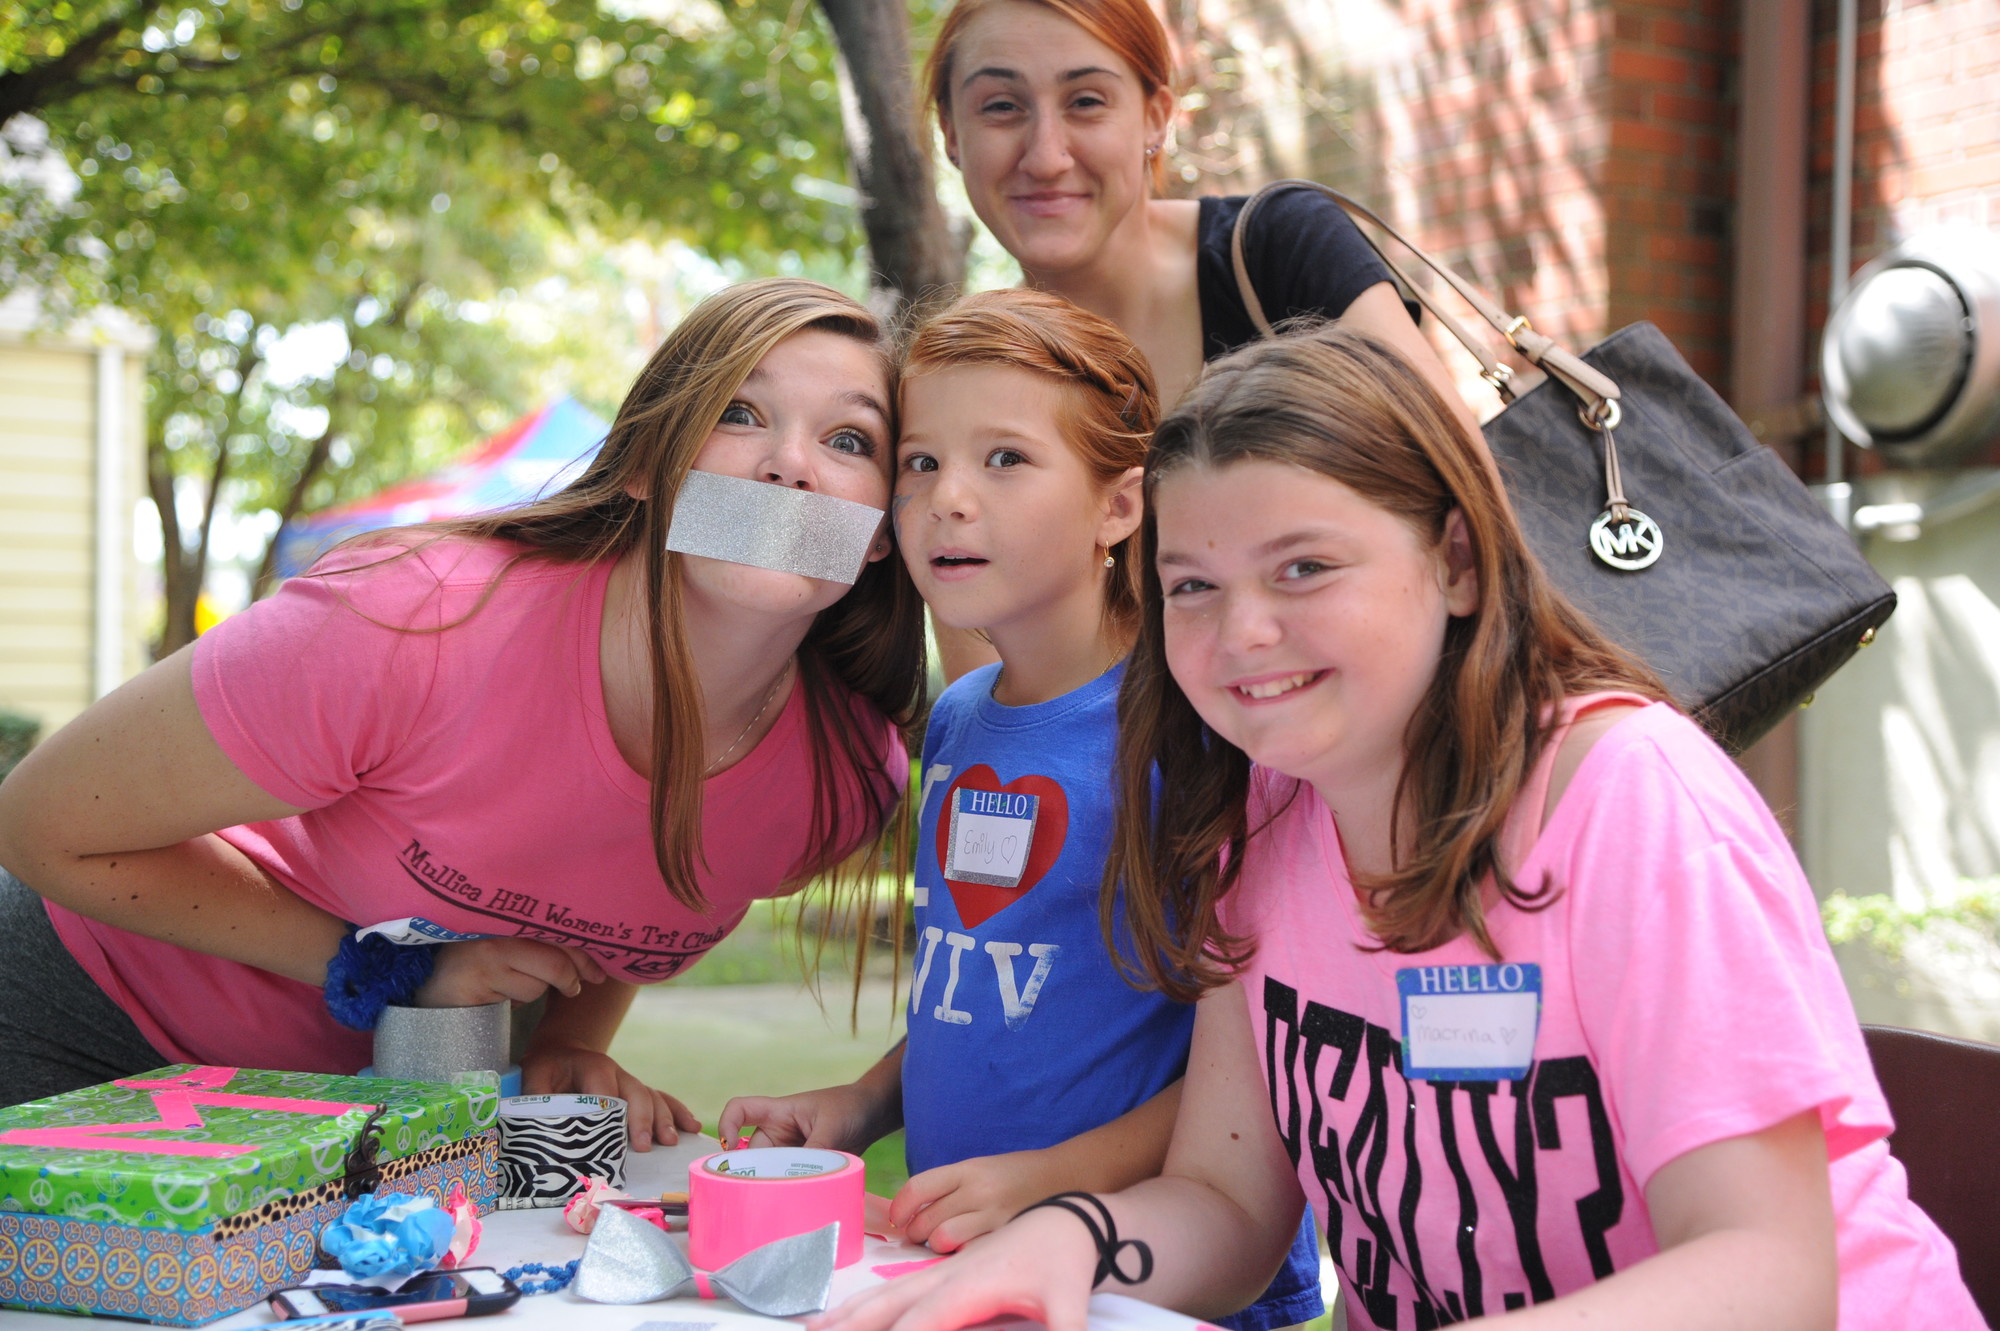 Kyra Kraus, 16, at left, Emily Cackett, 10, Macrina Kraus, 11, and Maria Krzeminski, 18, up top, dabbled in arts and crafts at the family festival.